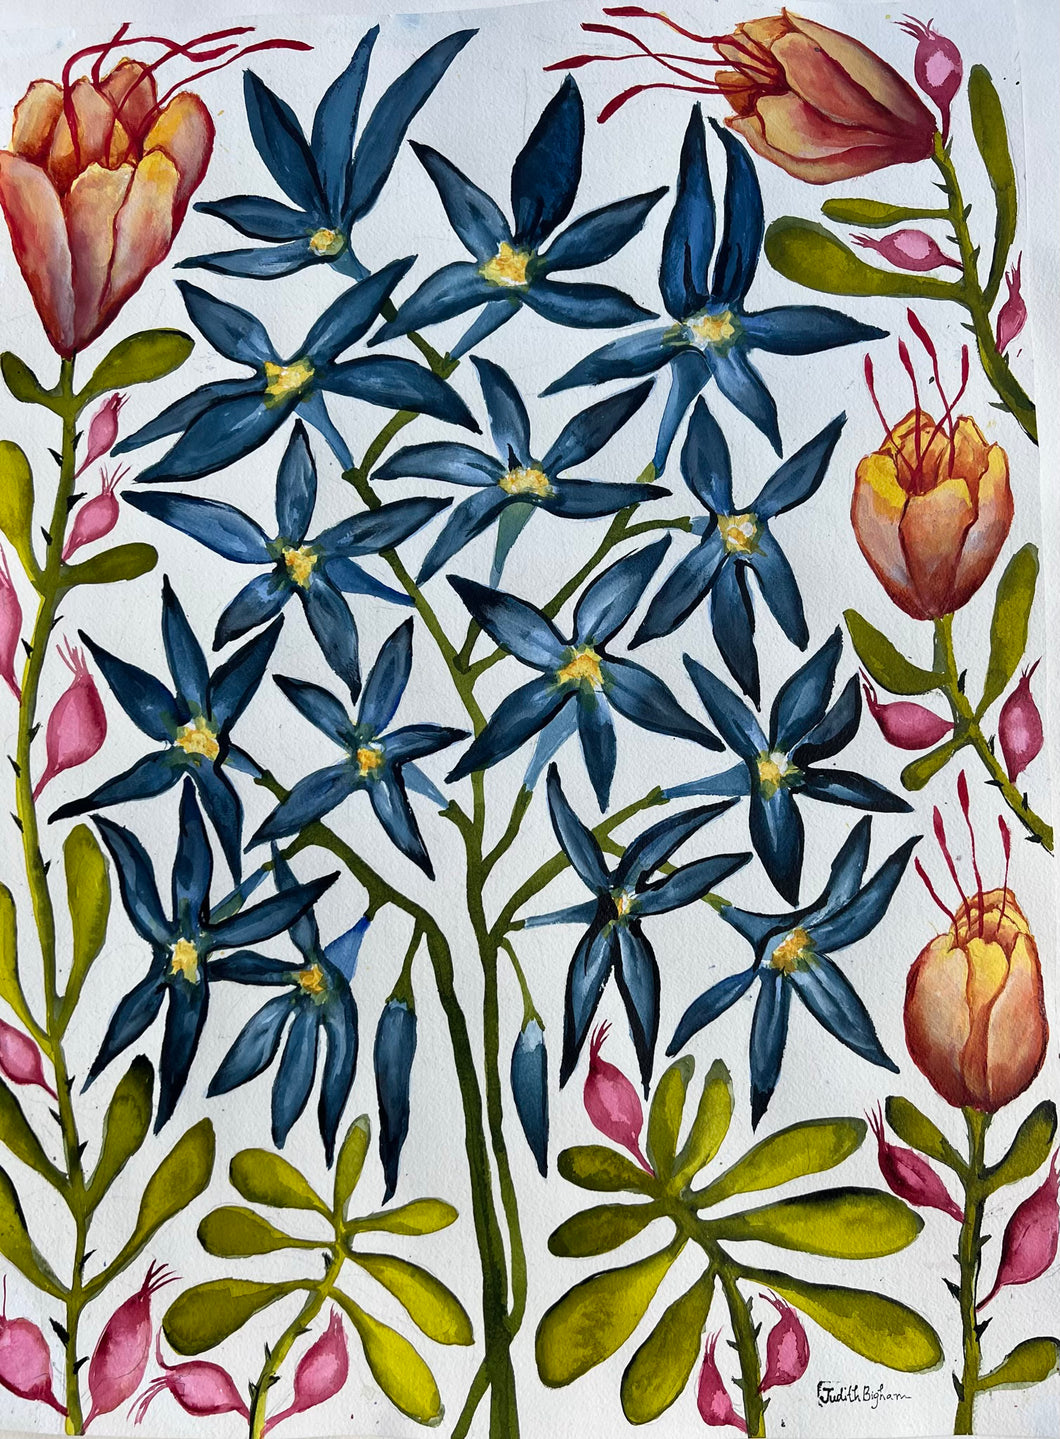 Blue Star with Pink Buds 18x24